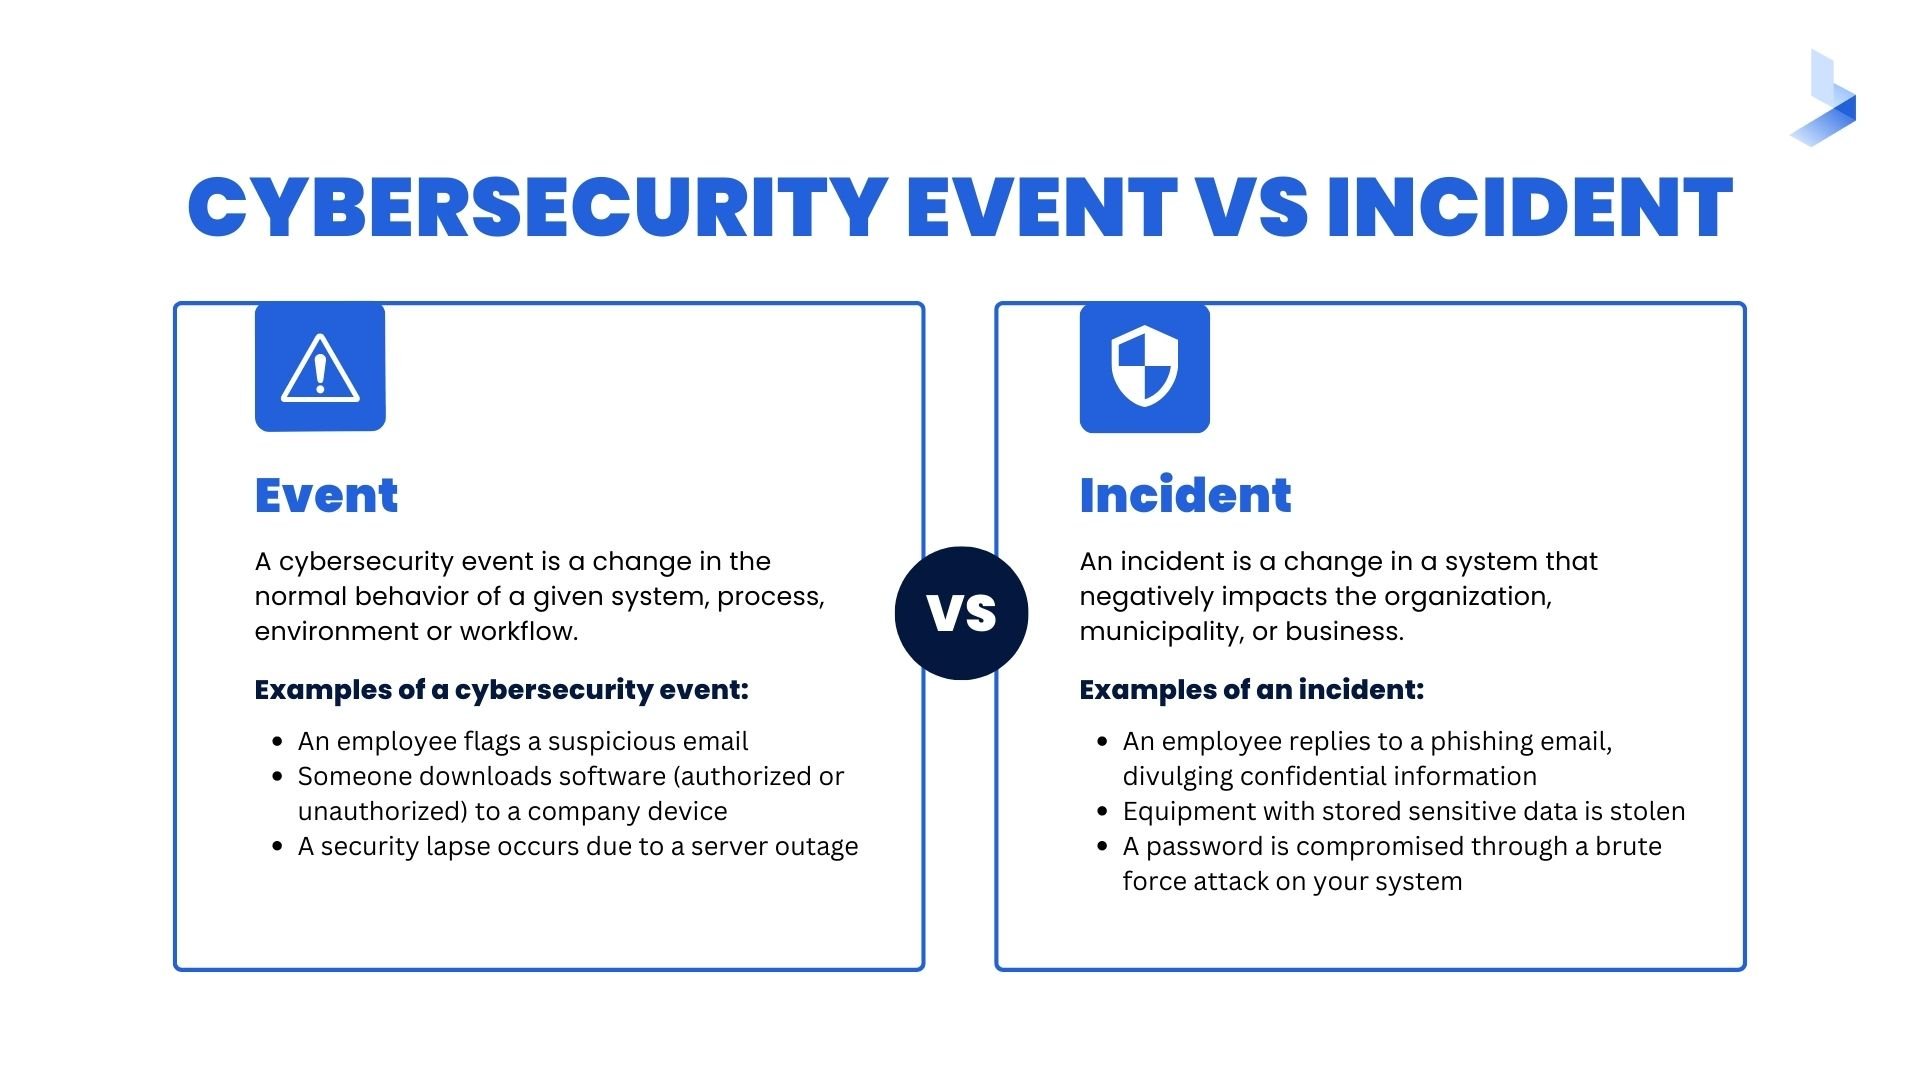 Cybersecurity Event vs Incident